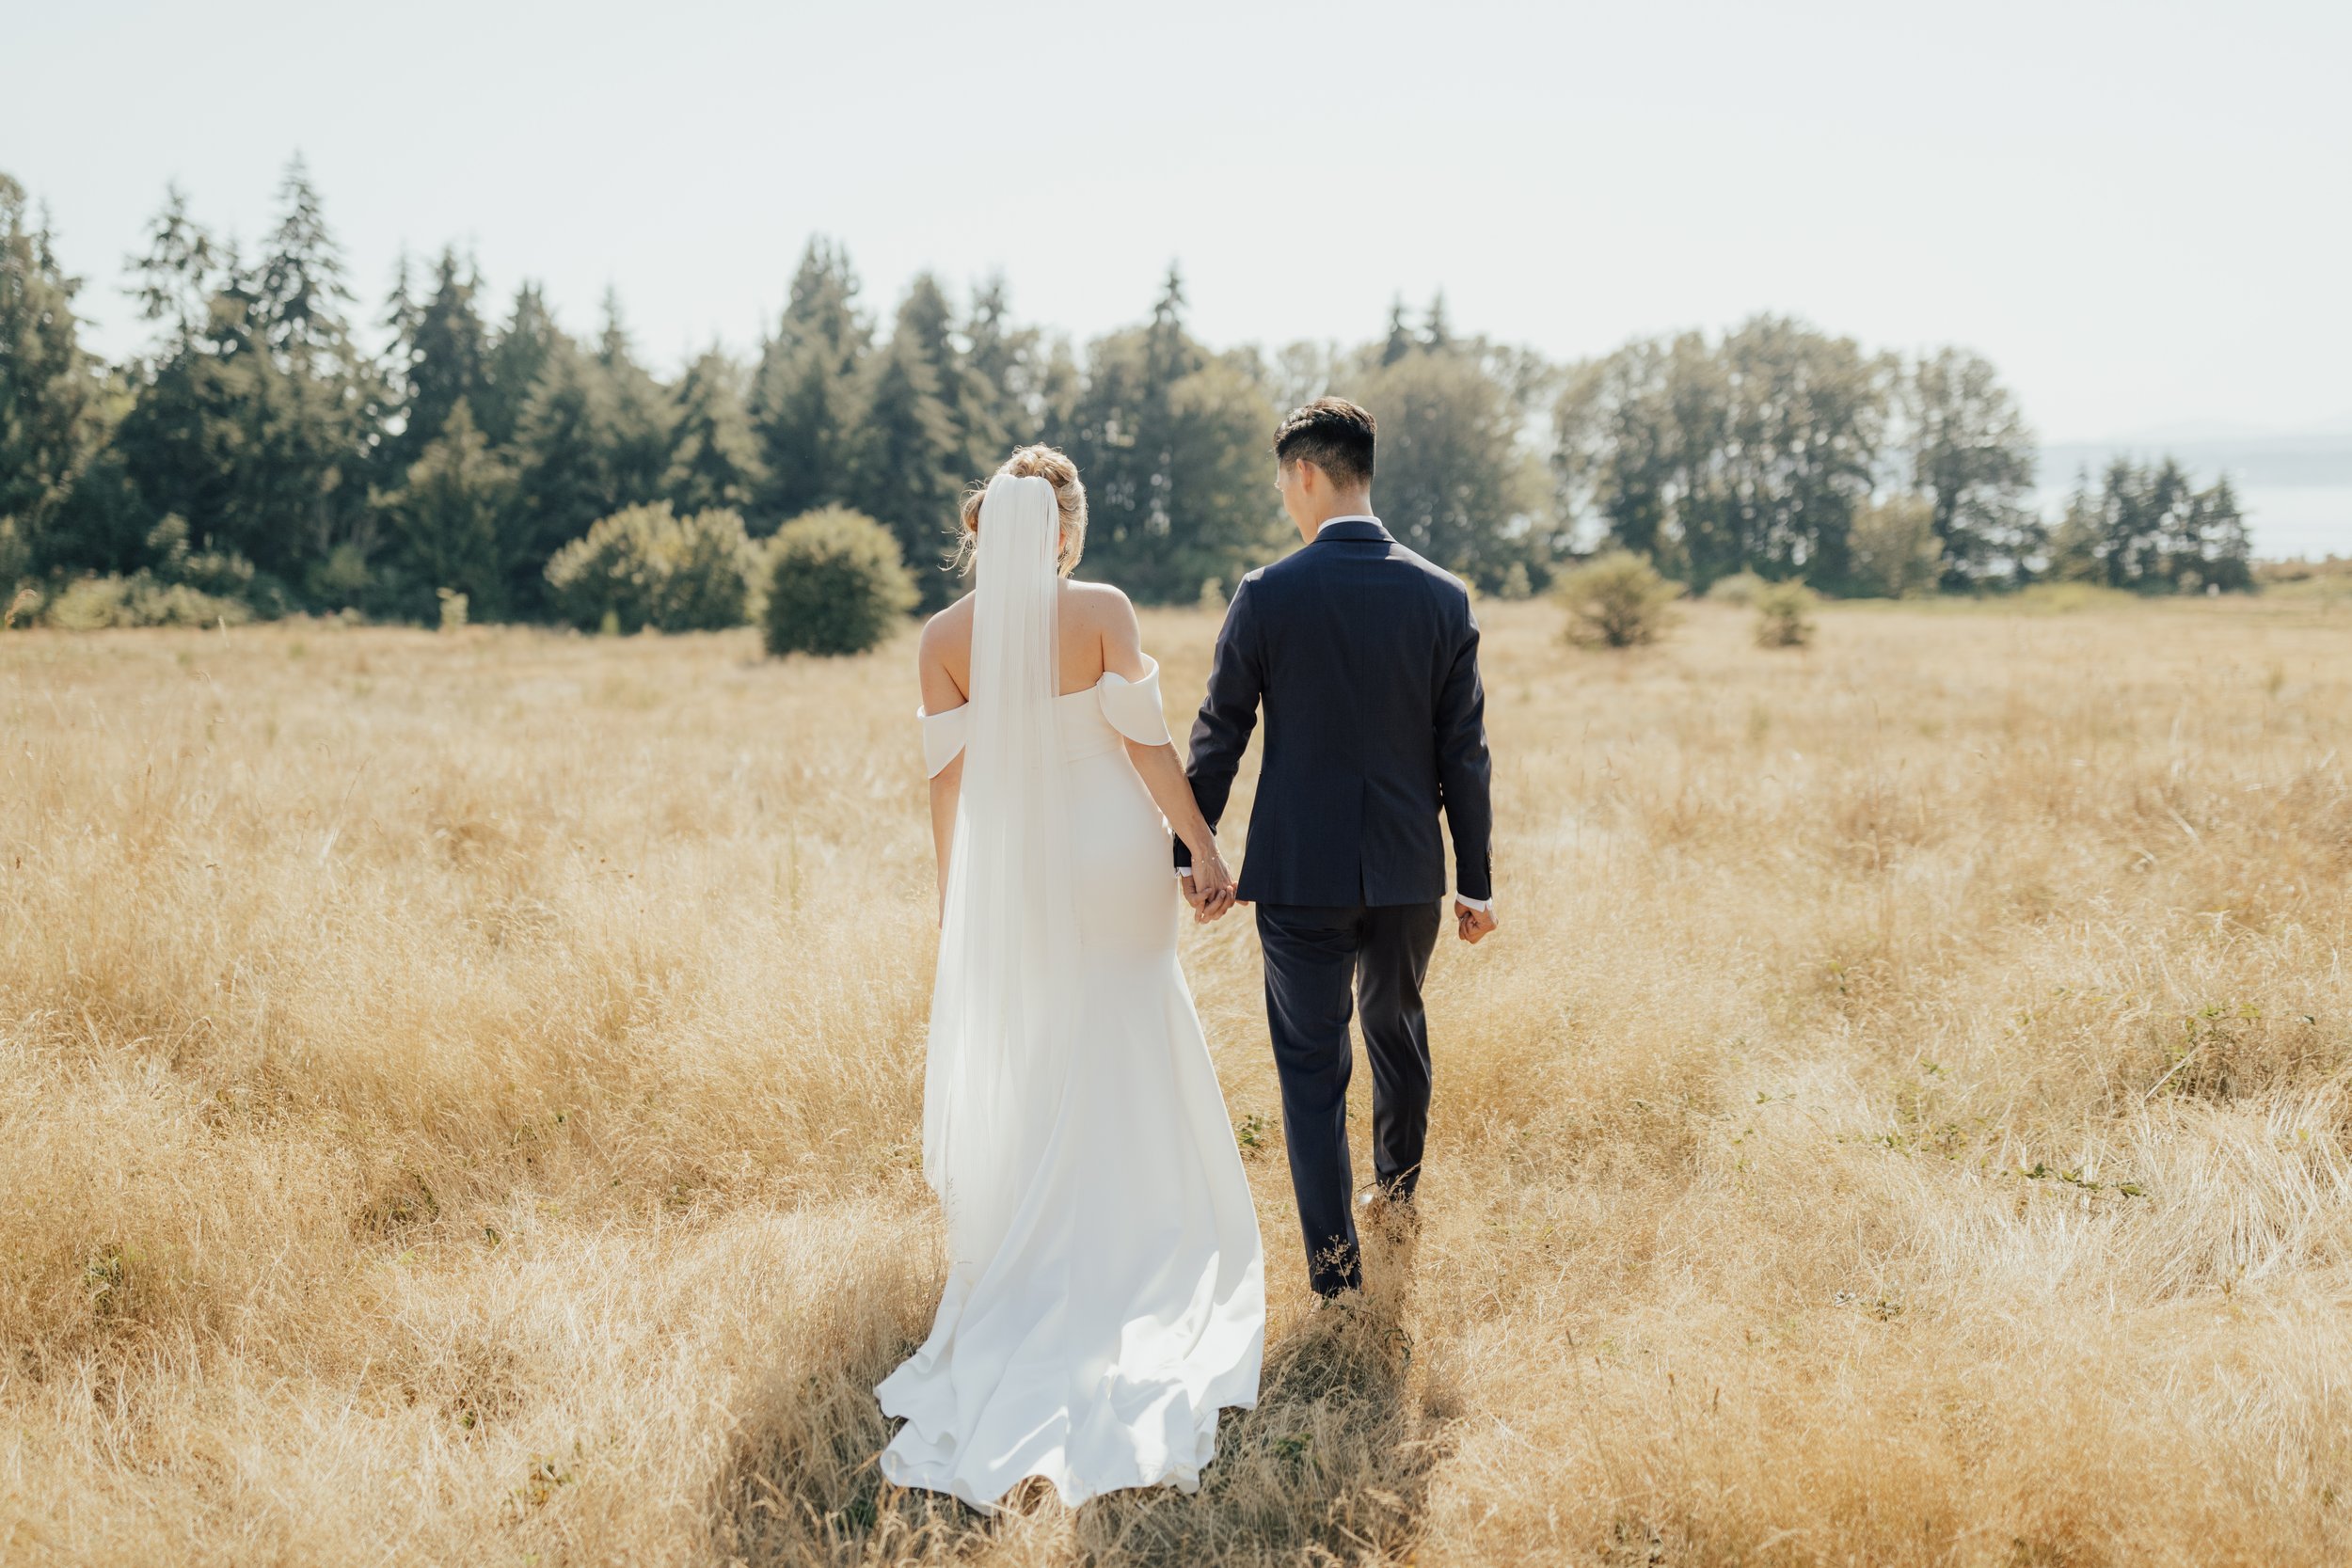 top-seattle-wedding-planner-pacific-engagements-discovery-park-wedding-portraits-bride-and-groom-walking-away-rachel-syrisko-photography